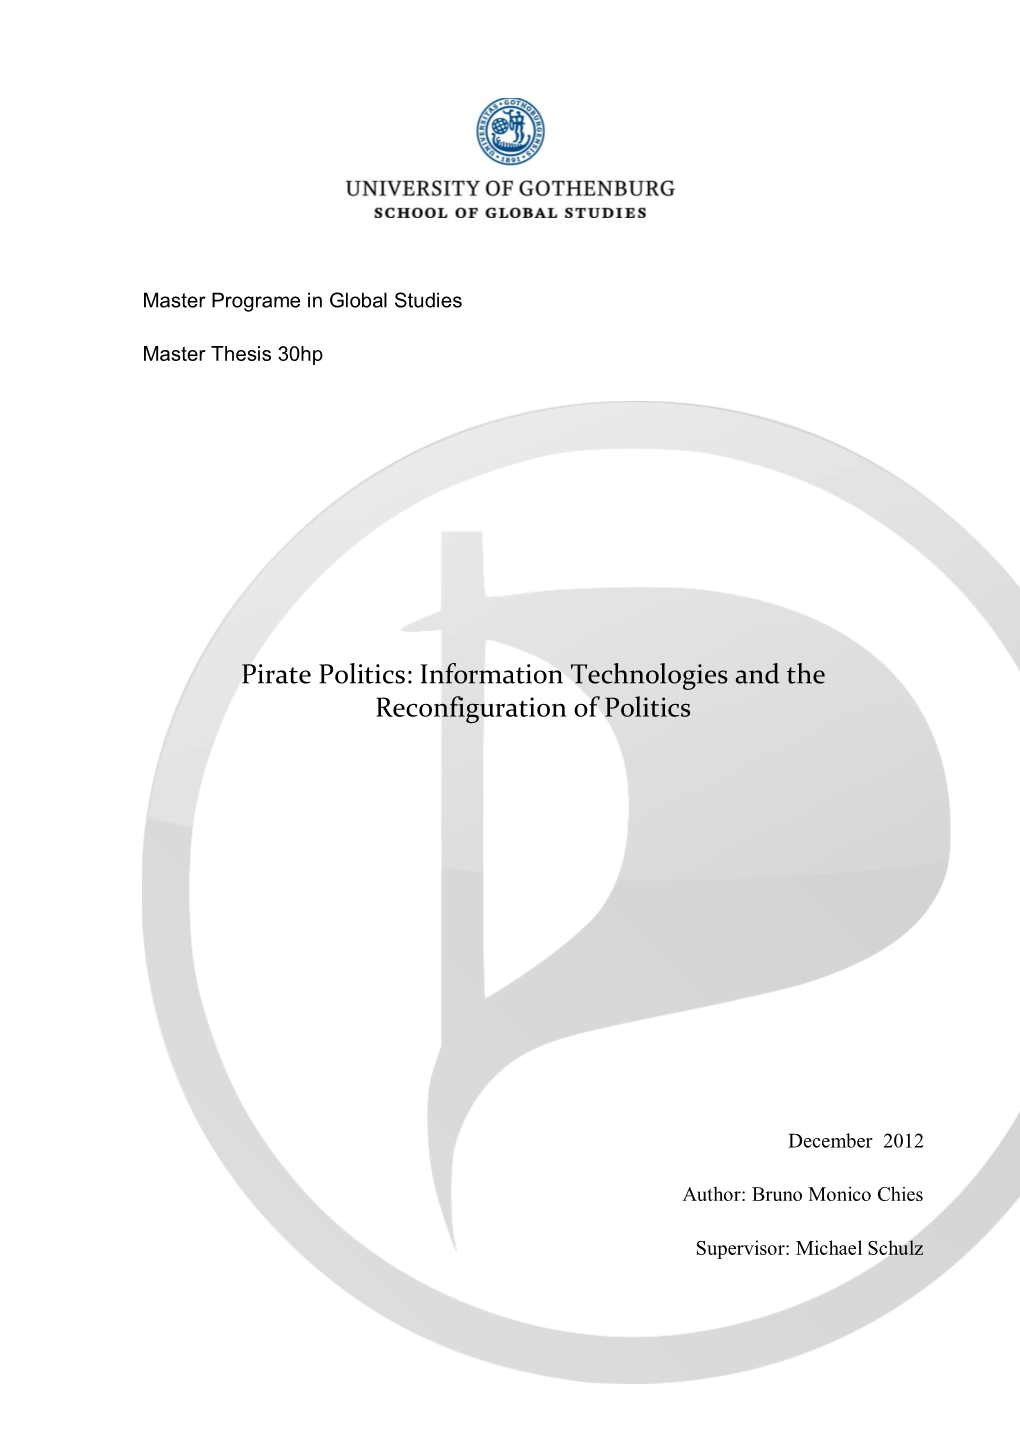 Pirate Politics: Information Technologies and the Reconfiguration of Politics